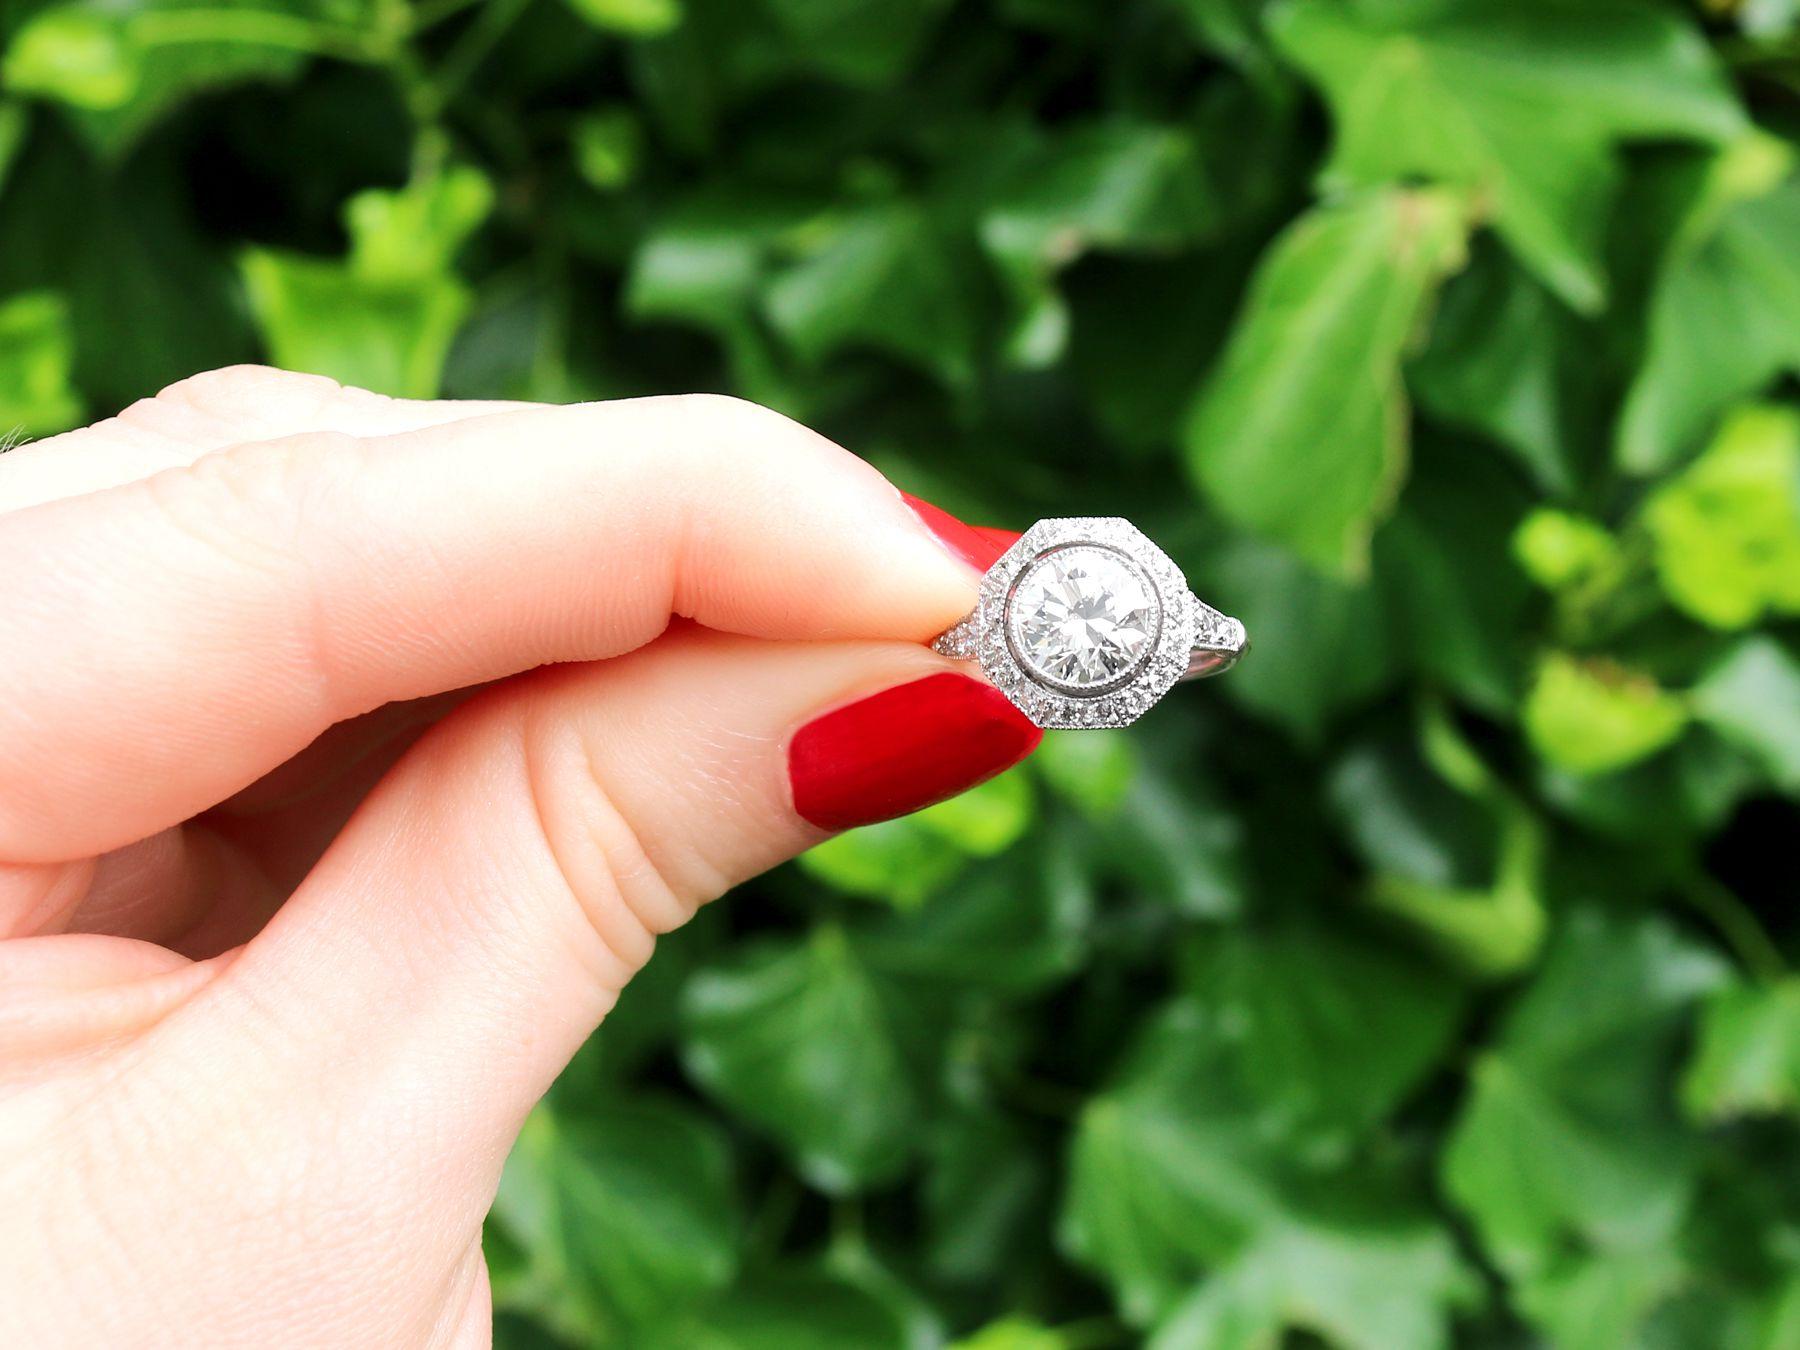 An impressive antique and vintage 2.30 carat diamond and contemporary platinum cocktail ring; part of our diverse diamond jewelry and estate jewelry collections.

This stunning, fine and impressive halo diamond engagement ring has been crafted in